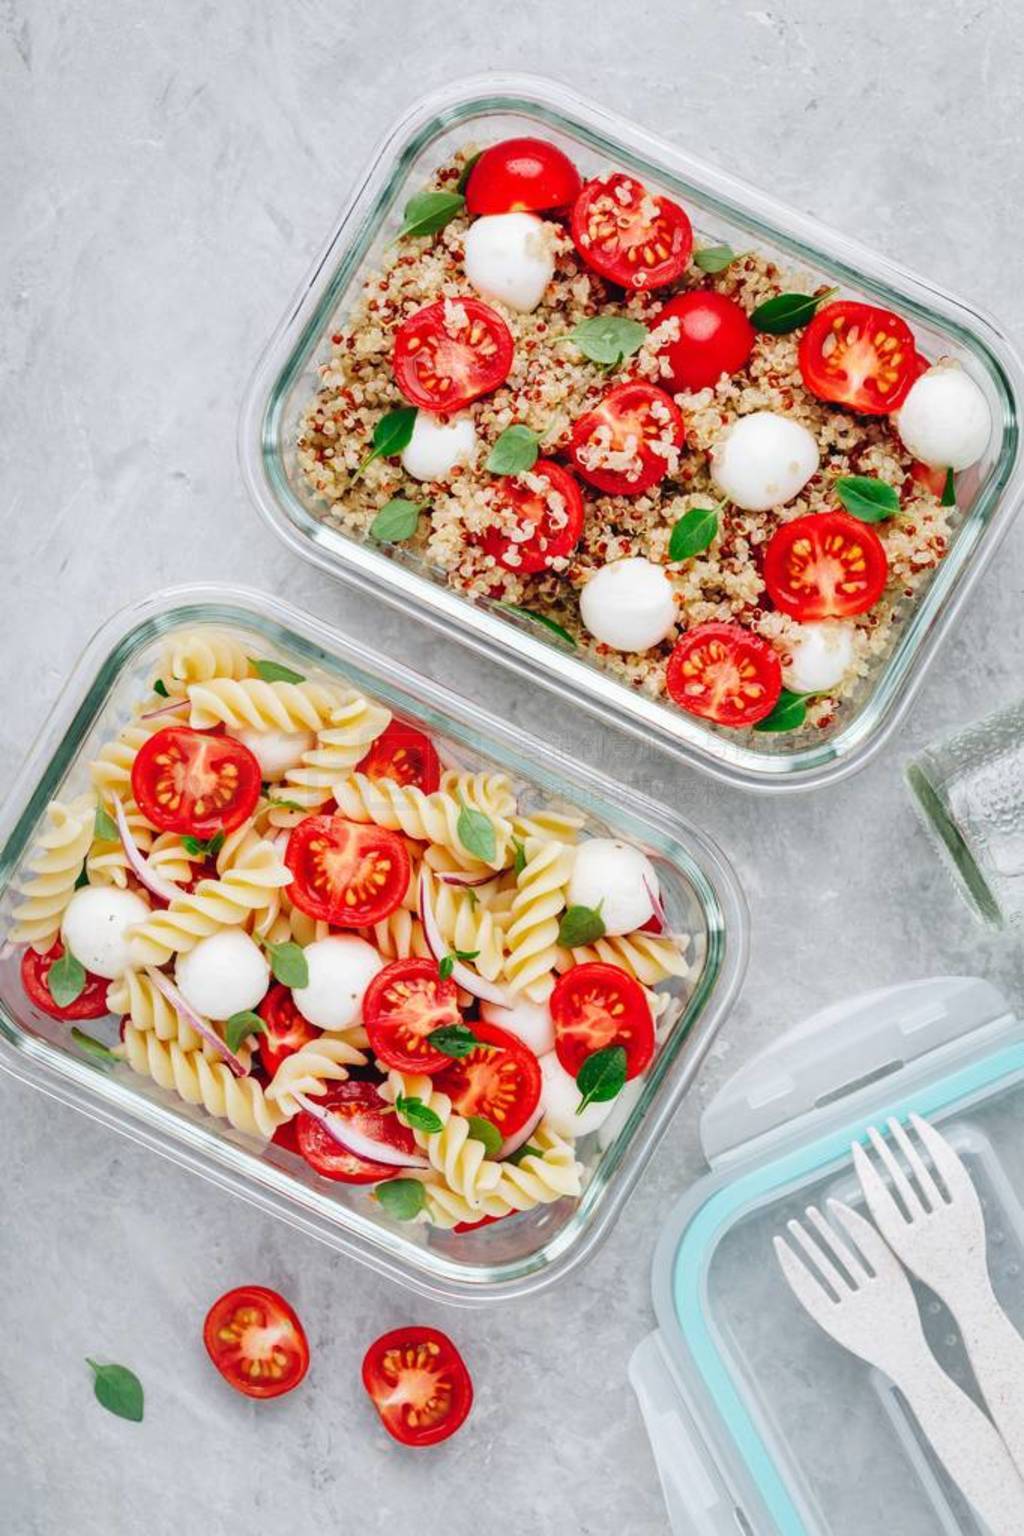 Meal prep containers with pasta salad or quinoa, tomatoes, mozza